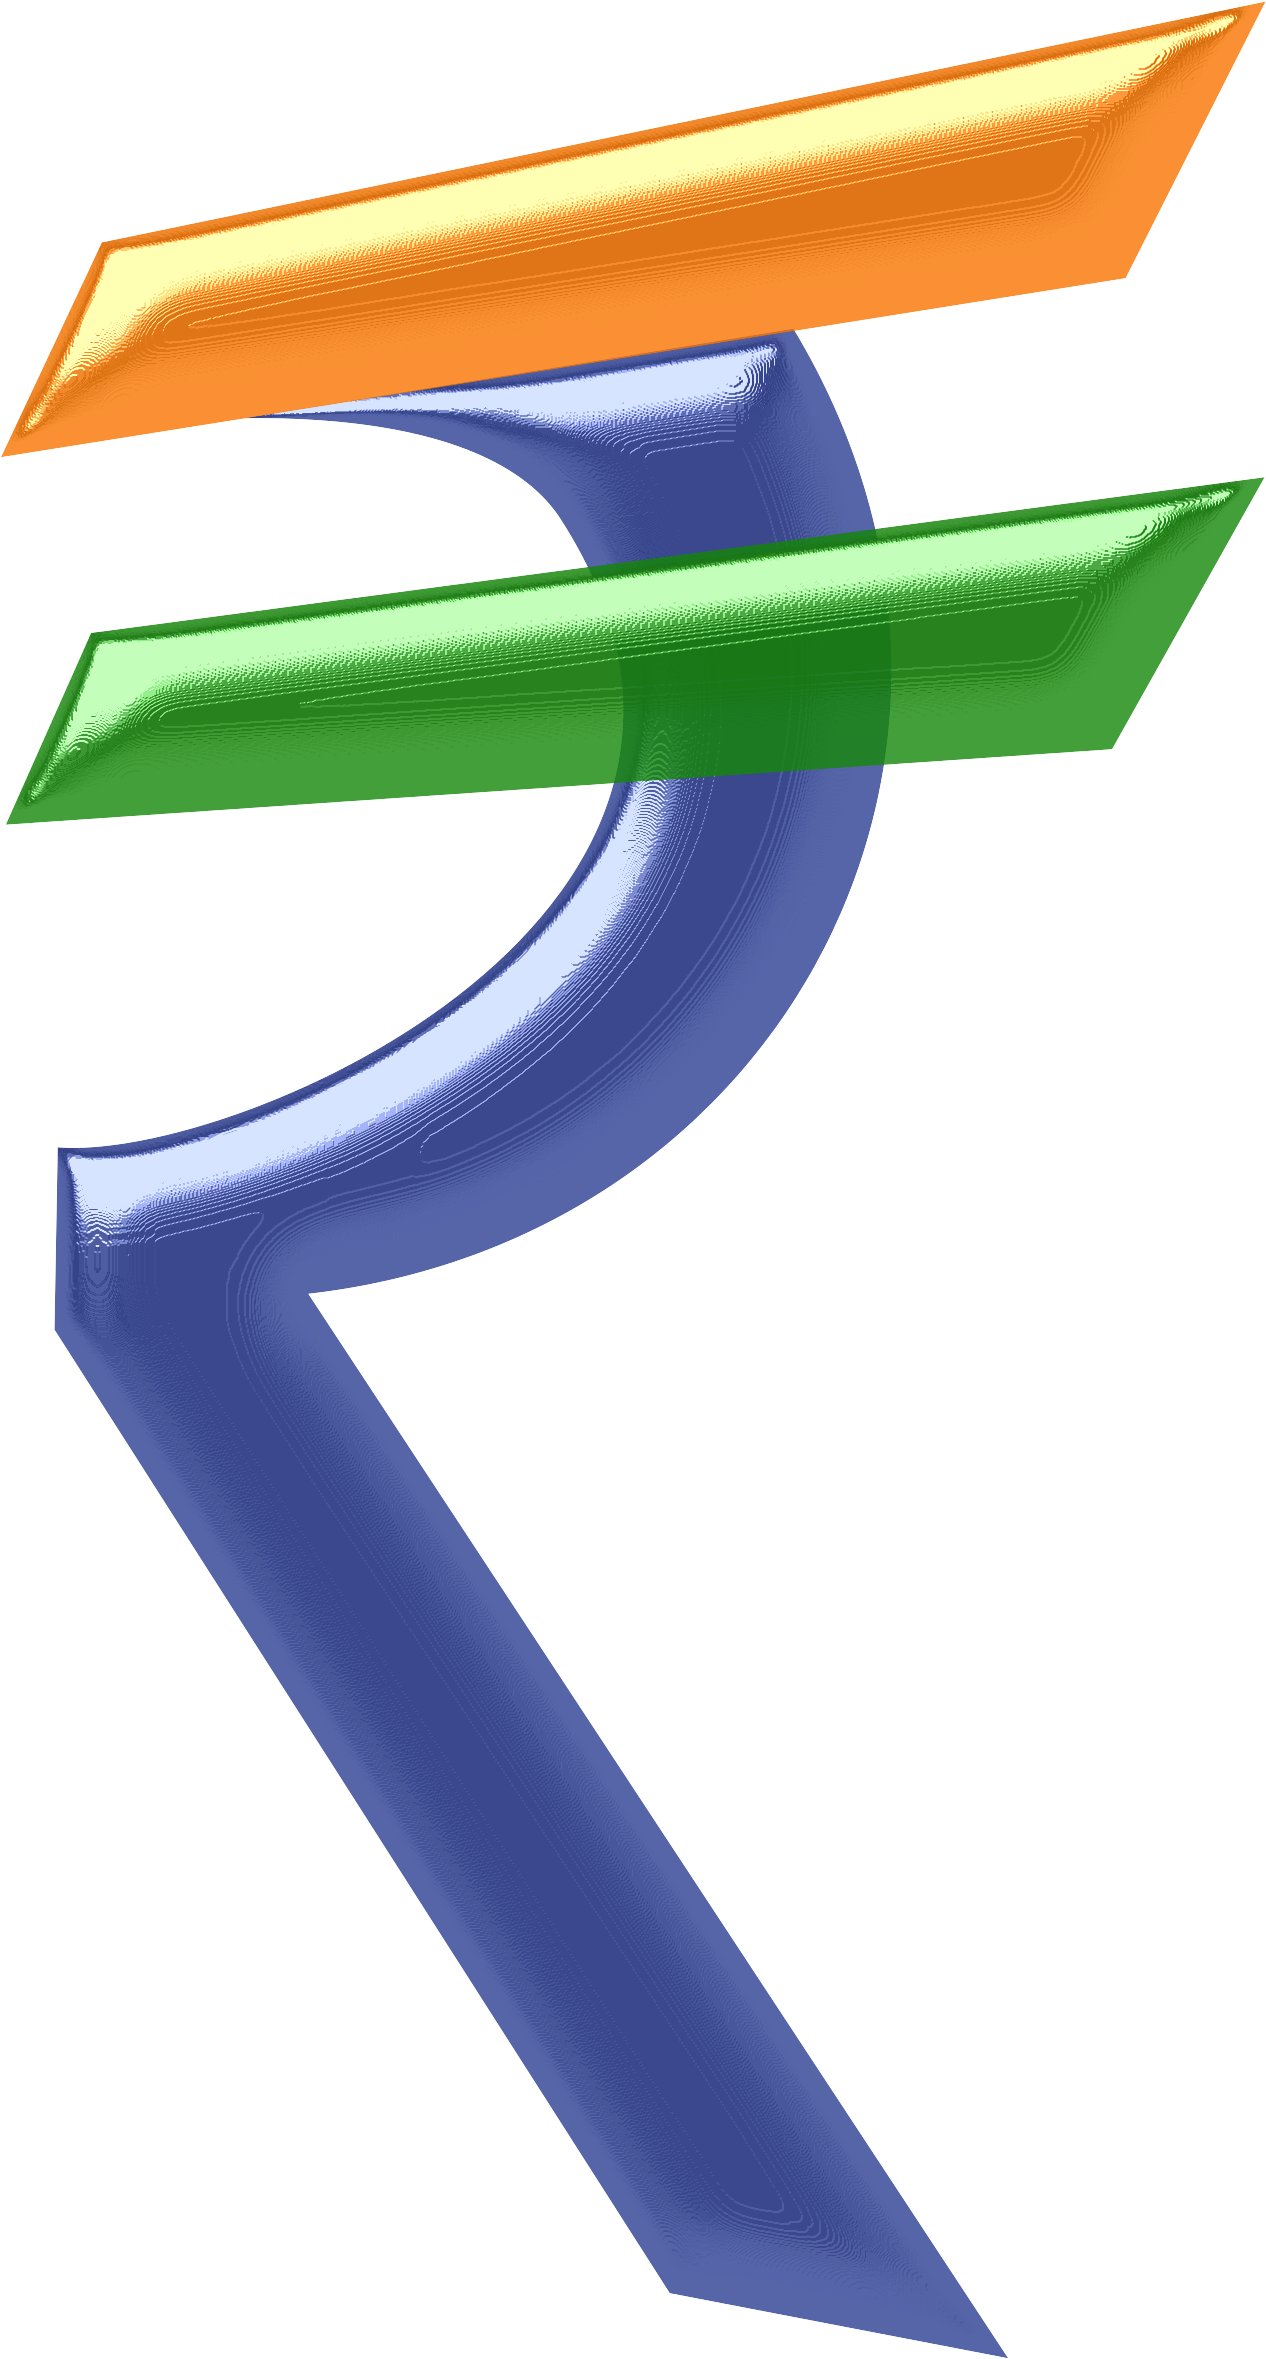 Indian Rupees Png Images - Indian Rupee Symbol Meaning (2639x2400)